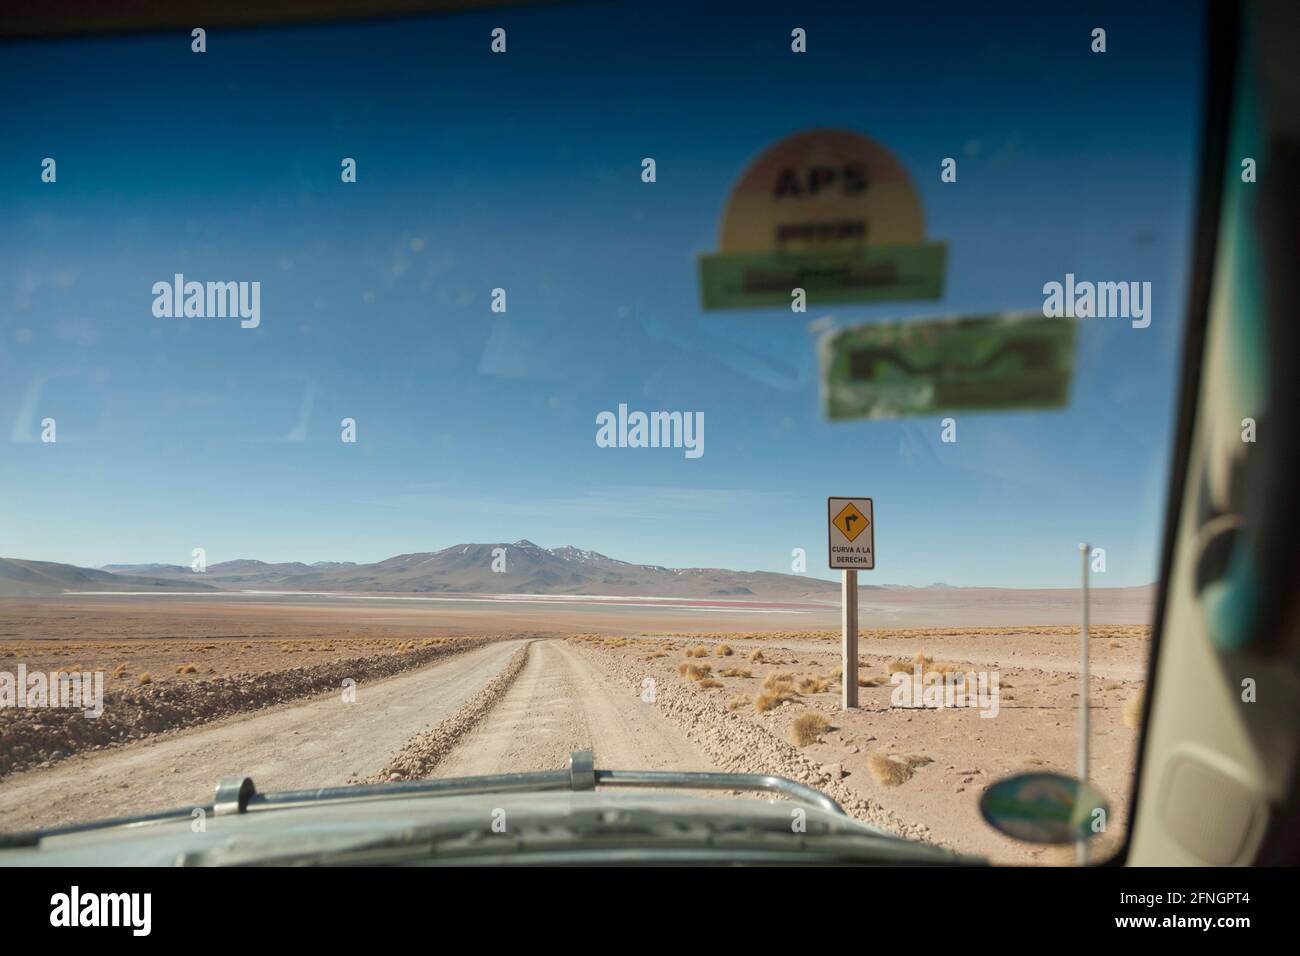 Viewed from the front passenger seat, a 4x4 vehicle drives along a Bolivian desert track on an overland tourist safari Stock Photo